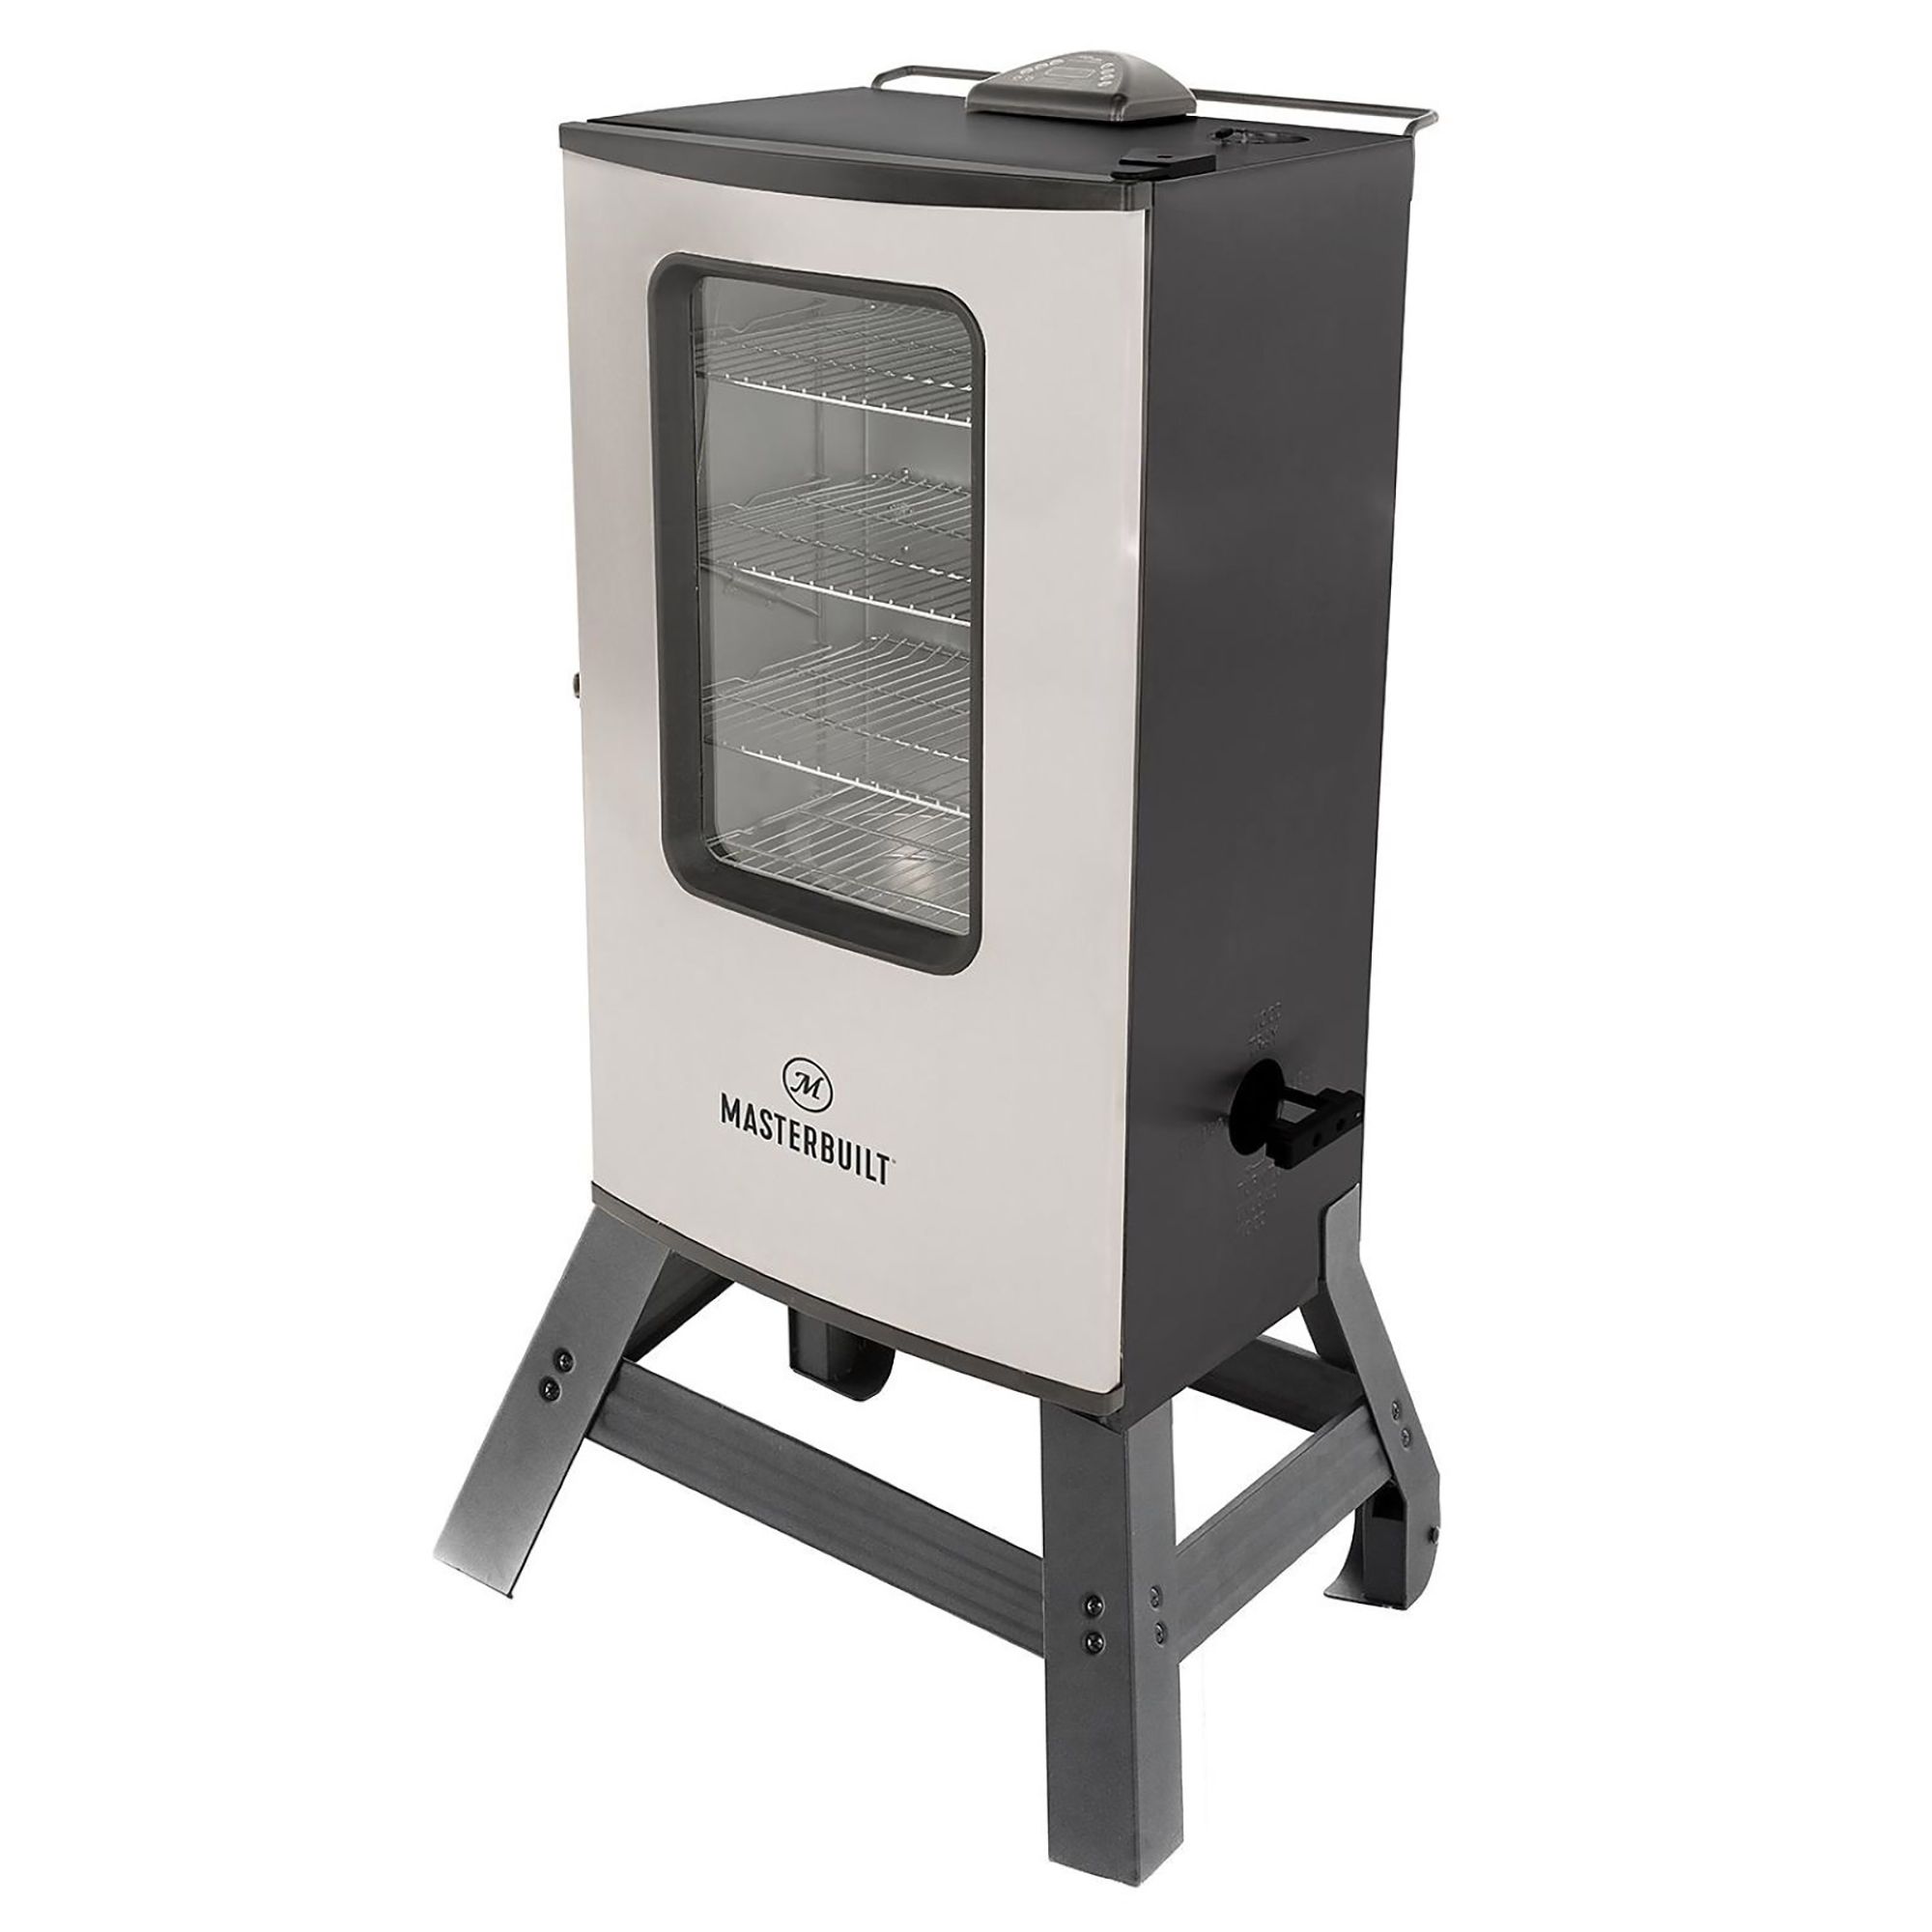 40-Inch Digital Electric Smoker with Window and Legs - Masterbuilt